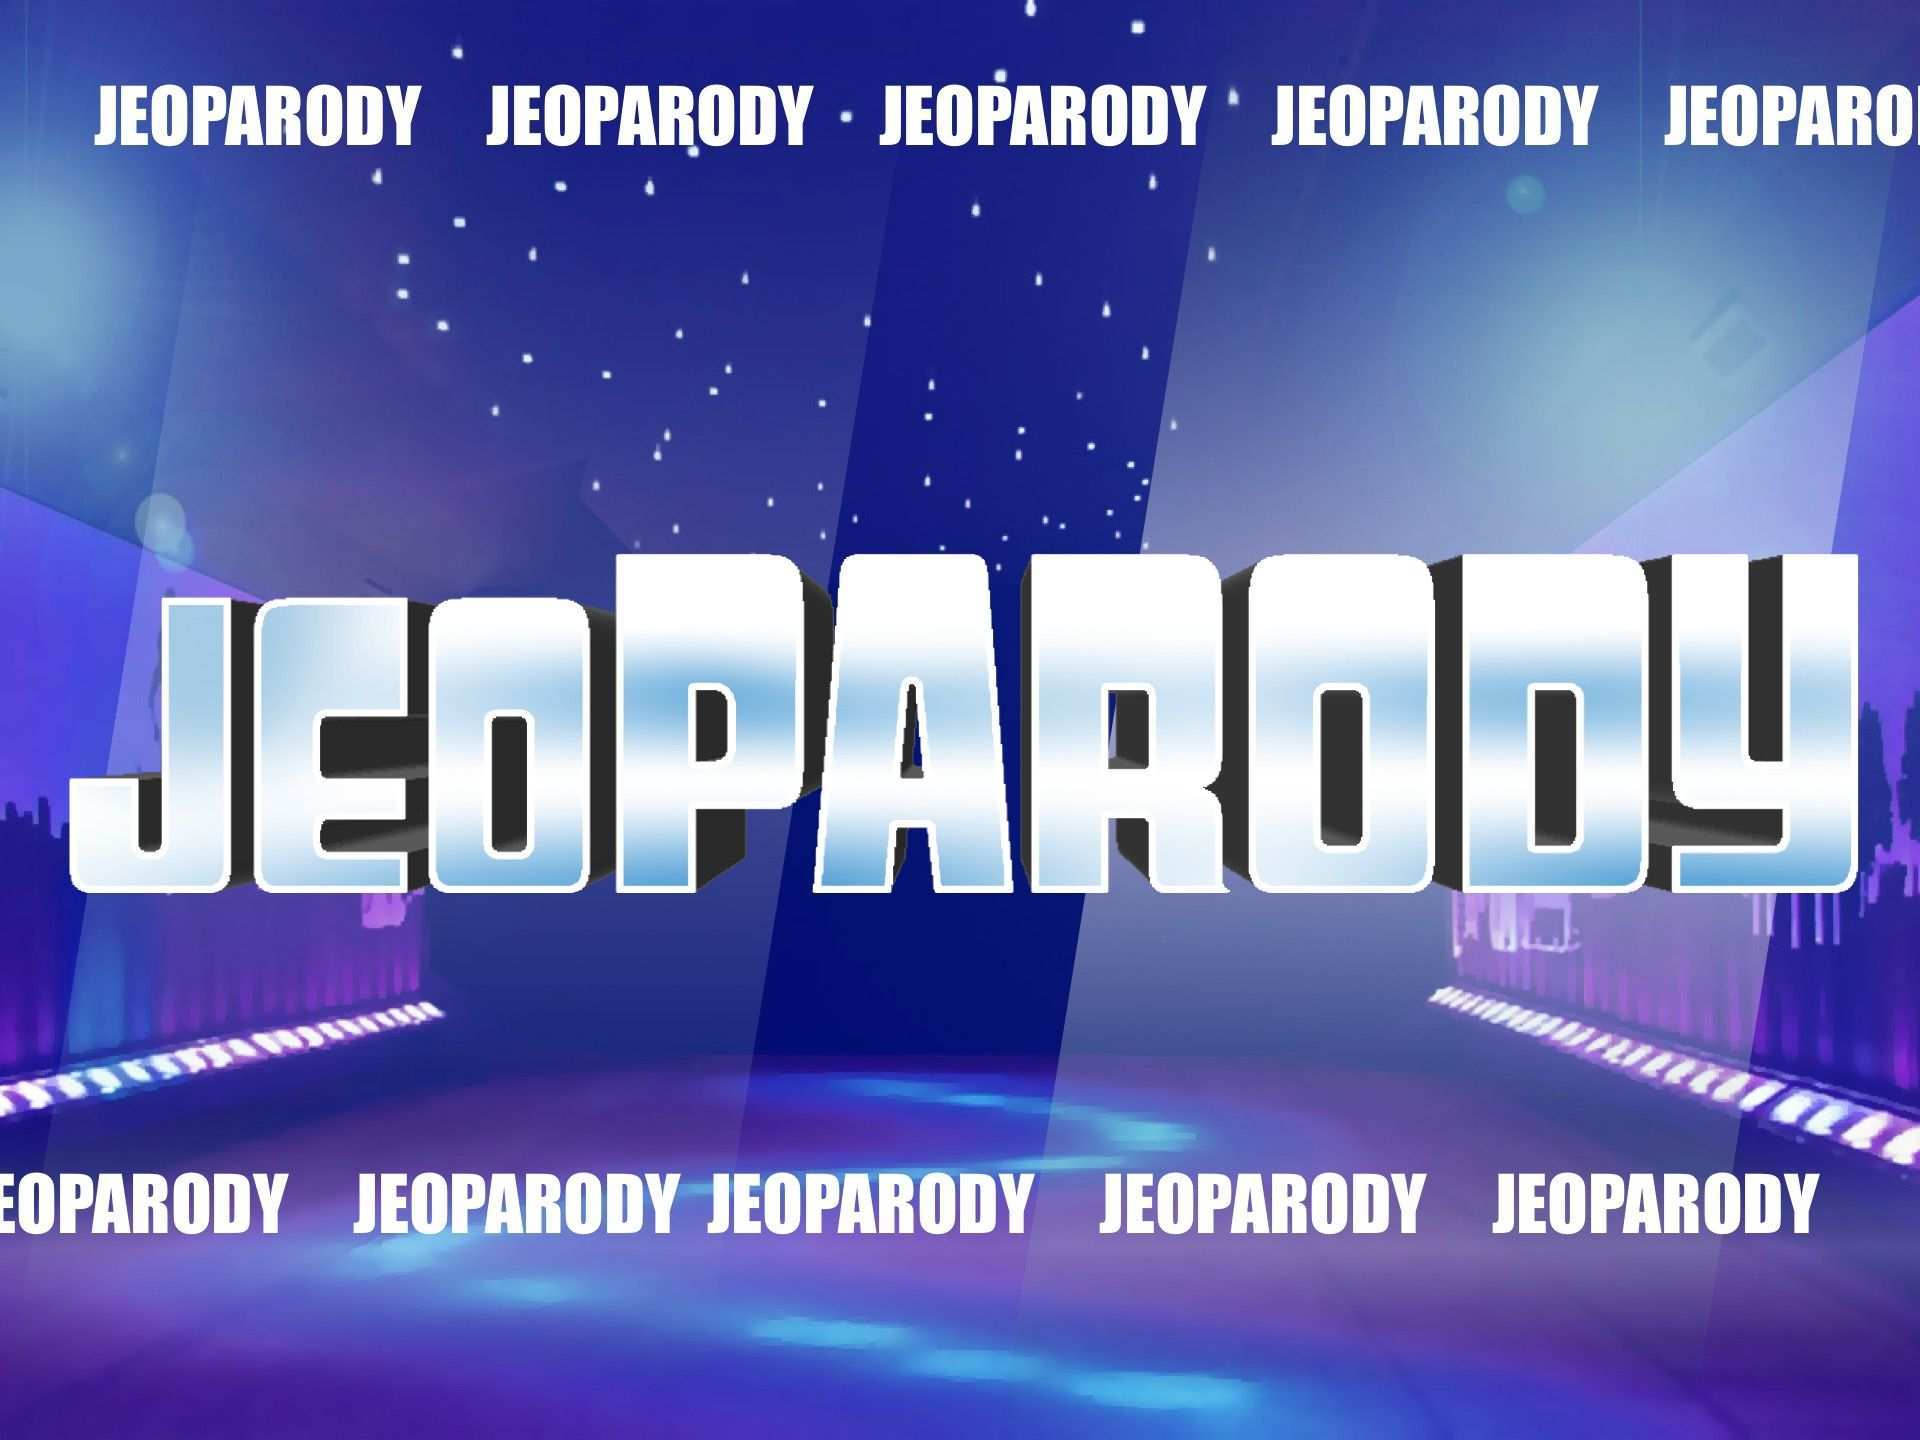 Fully Editable Jeopardy Powerpoint Template Game With Daily Doubles Final Jeopardy Theme M Jeopardy Powerpoint Template Jeopardy Template Jeopardy Powerpoint